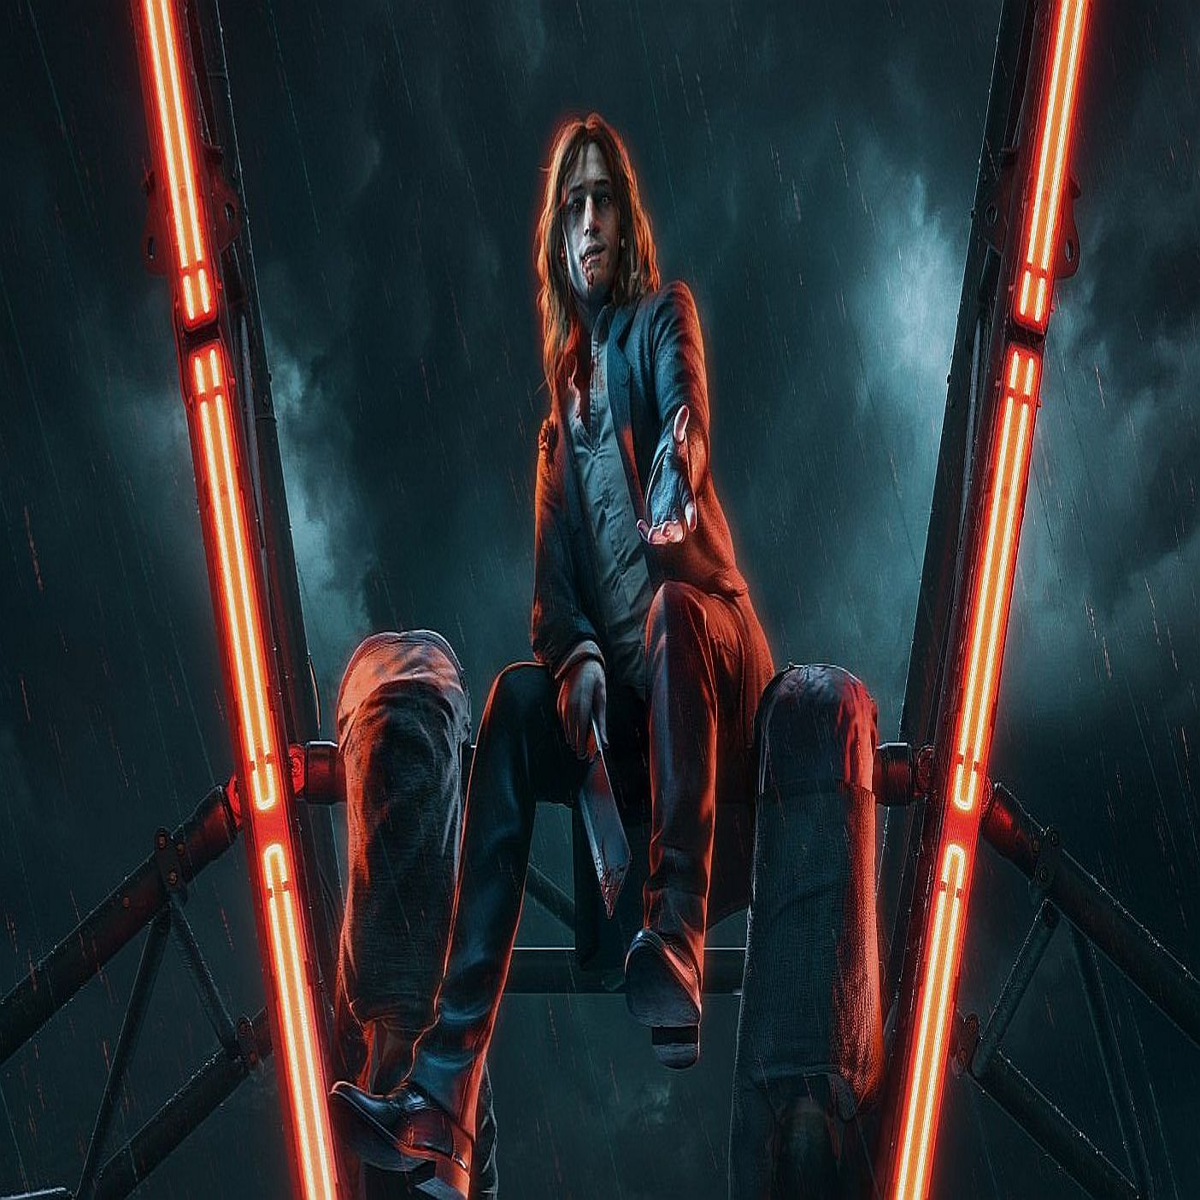 Vampire: The Masquerade - Bloodlines 2 delayed, Hardsuit Labs